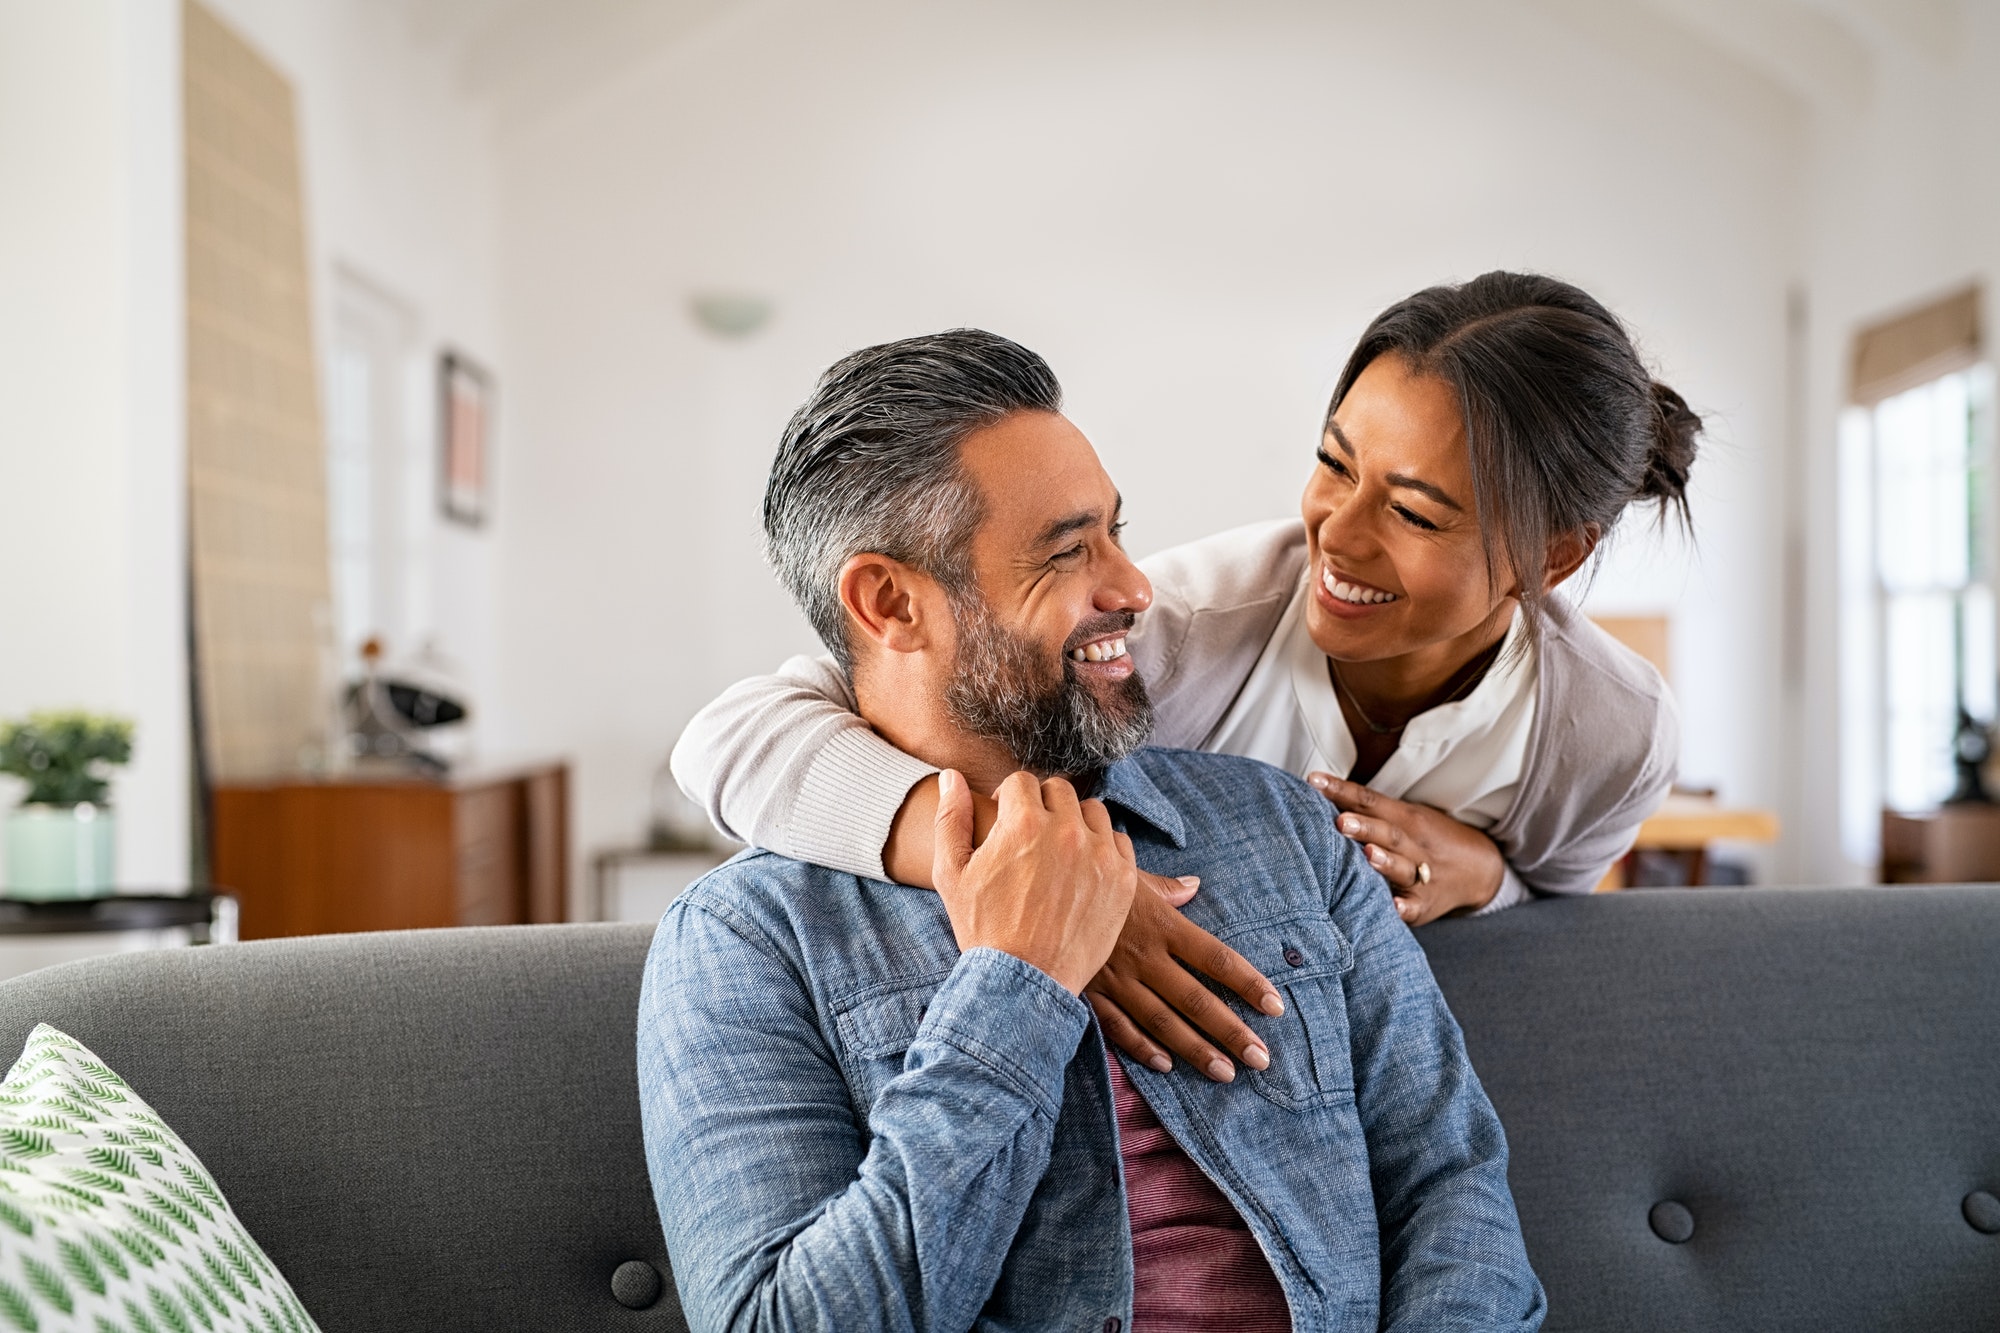 Mature multiethnic couple laughing and embracing at home